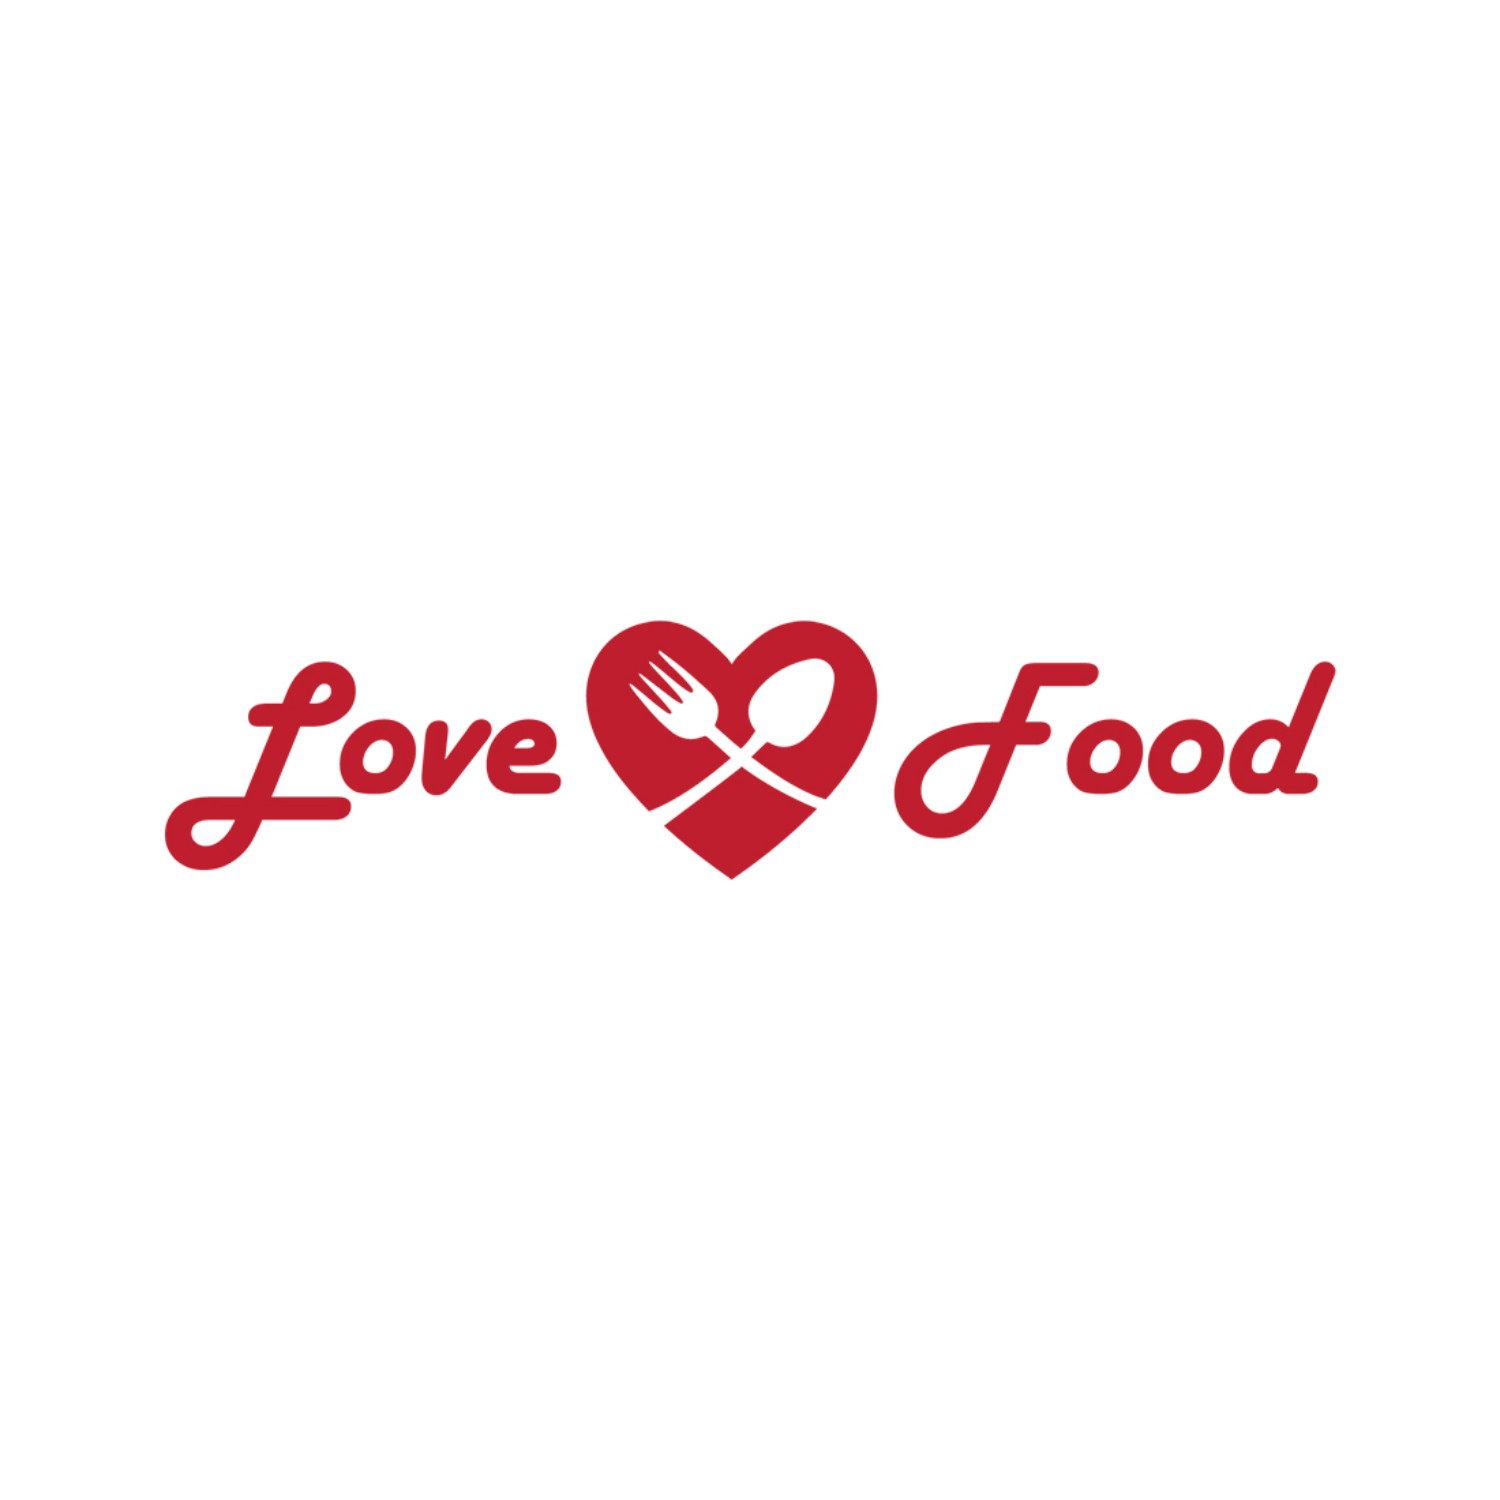 Food Love Vector Logo Template cover image.